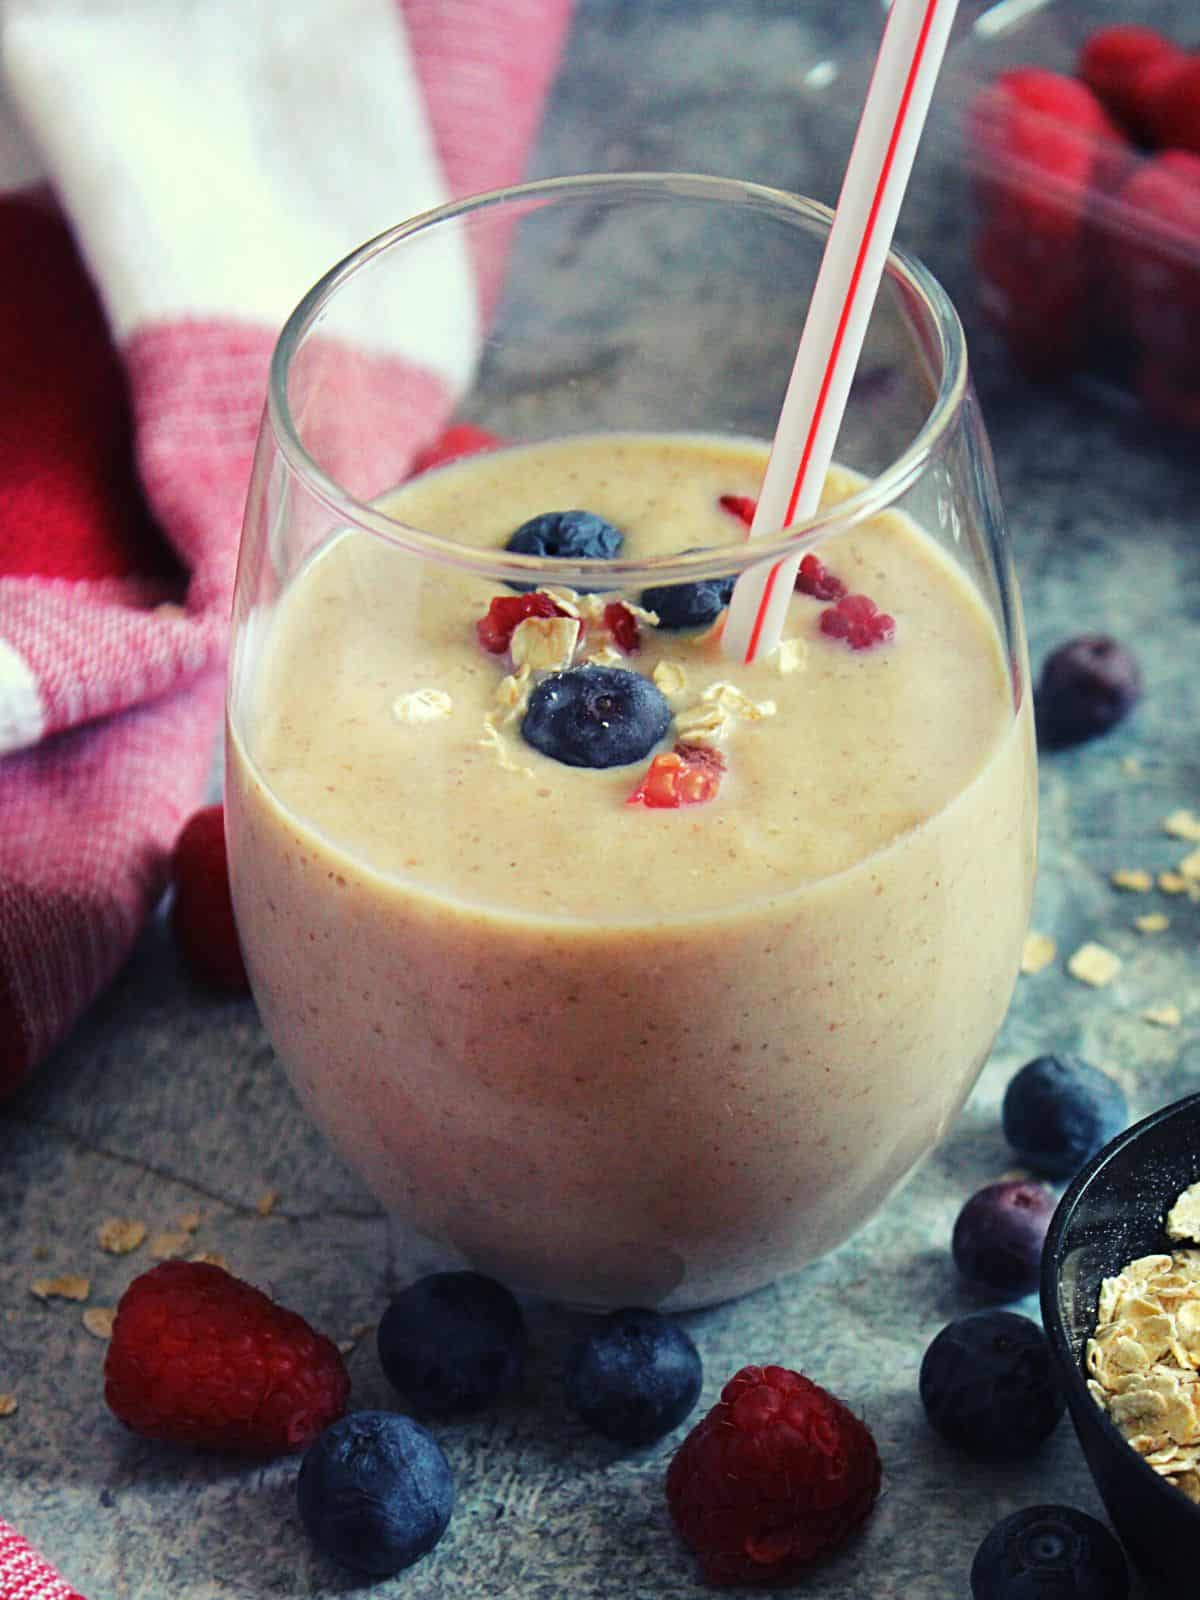 oats weight loss smoothie in a glass with colorful berries around